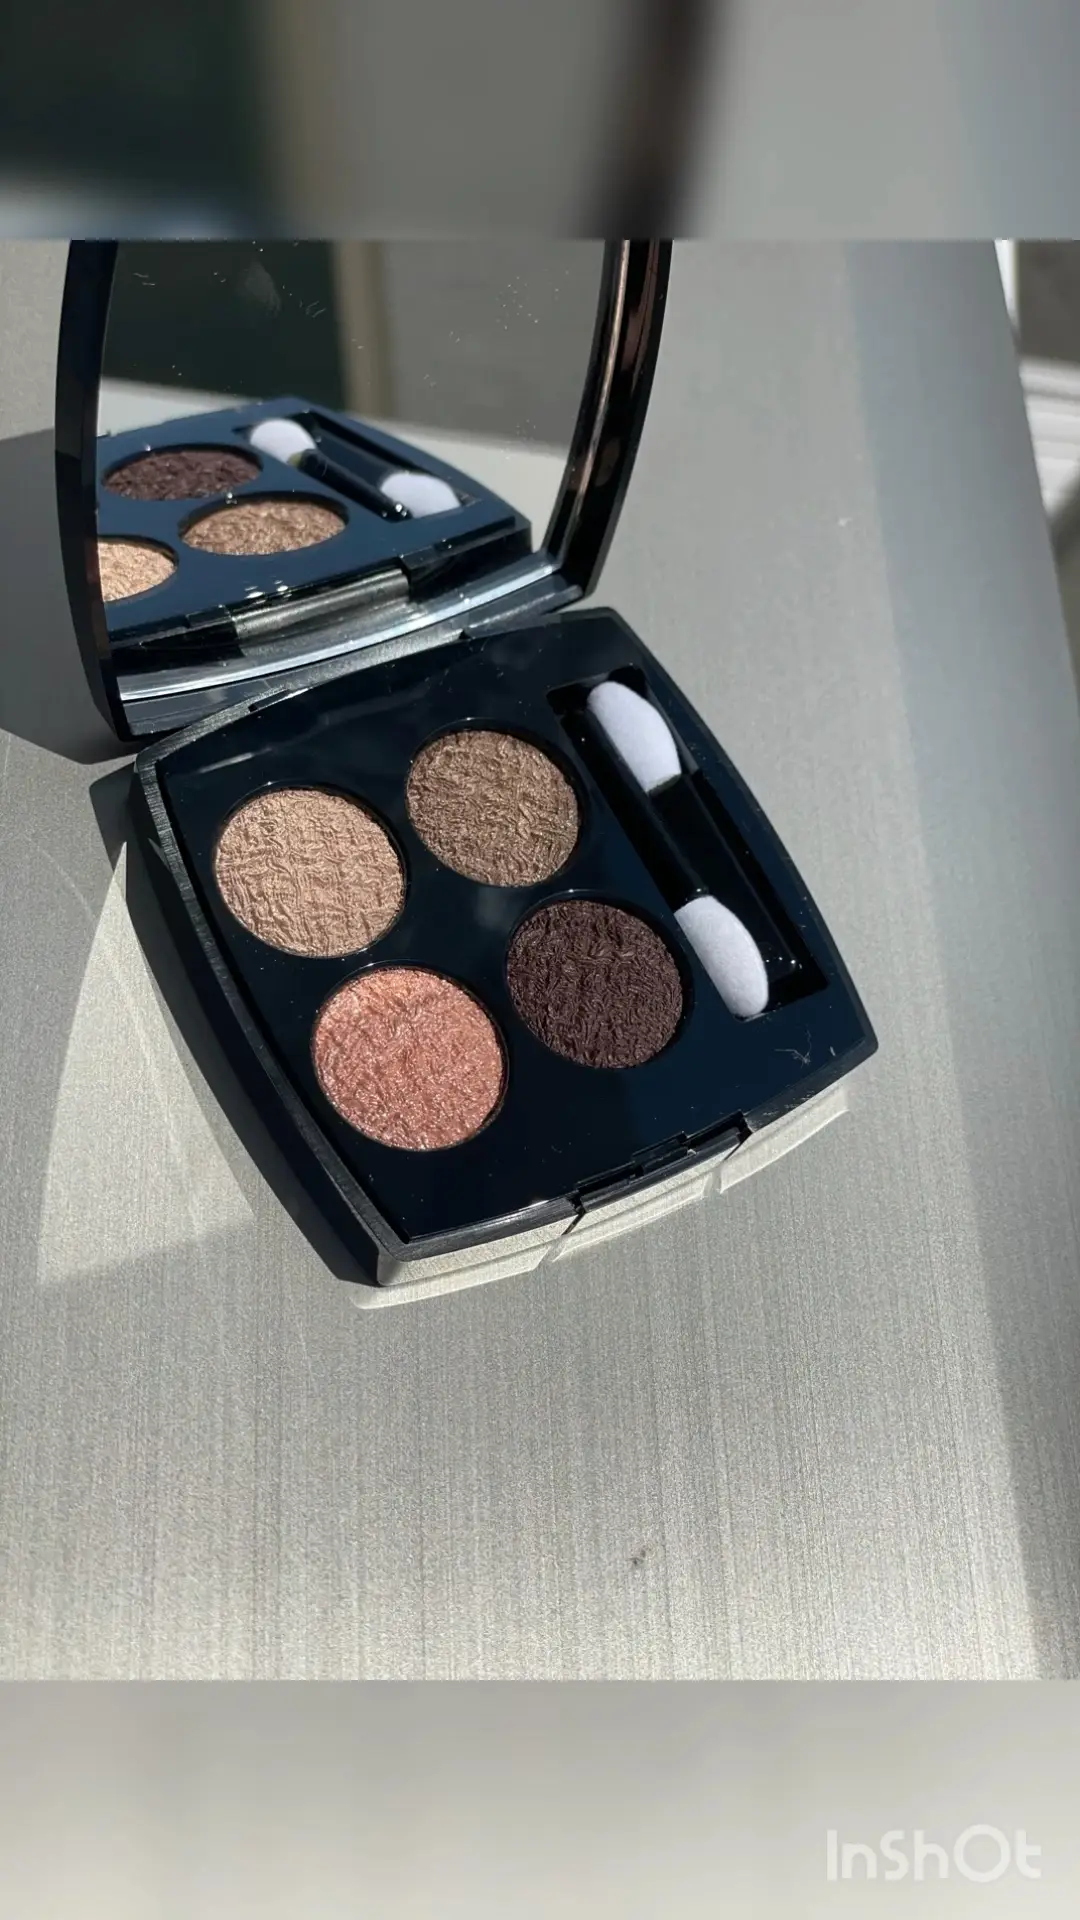 Chanel Ombres de Lune (937) Les 4 Ombres Multi-Effect Quadra Eyeshadow  Review & Swatches